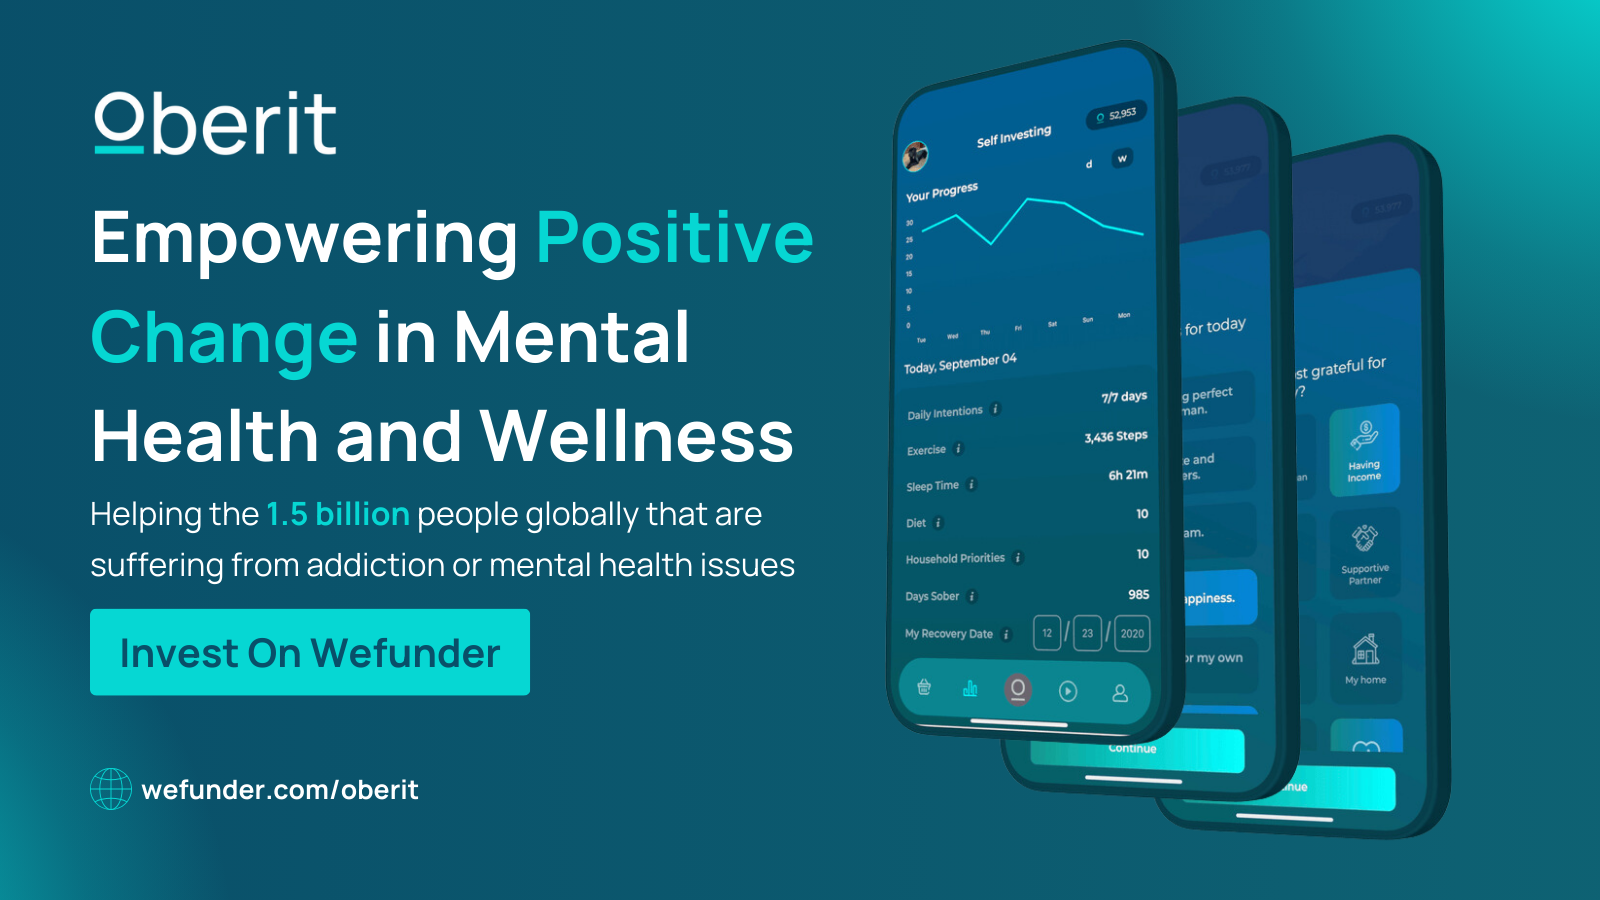 , Oberit&#8217;s Mission: Empowering Positive Change in Mental Health and Wellness – A Prime Investment Opportunity